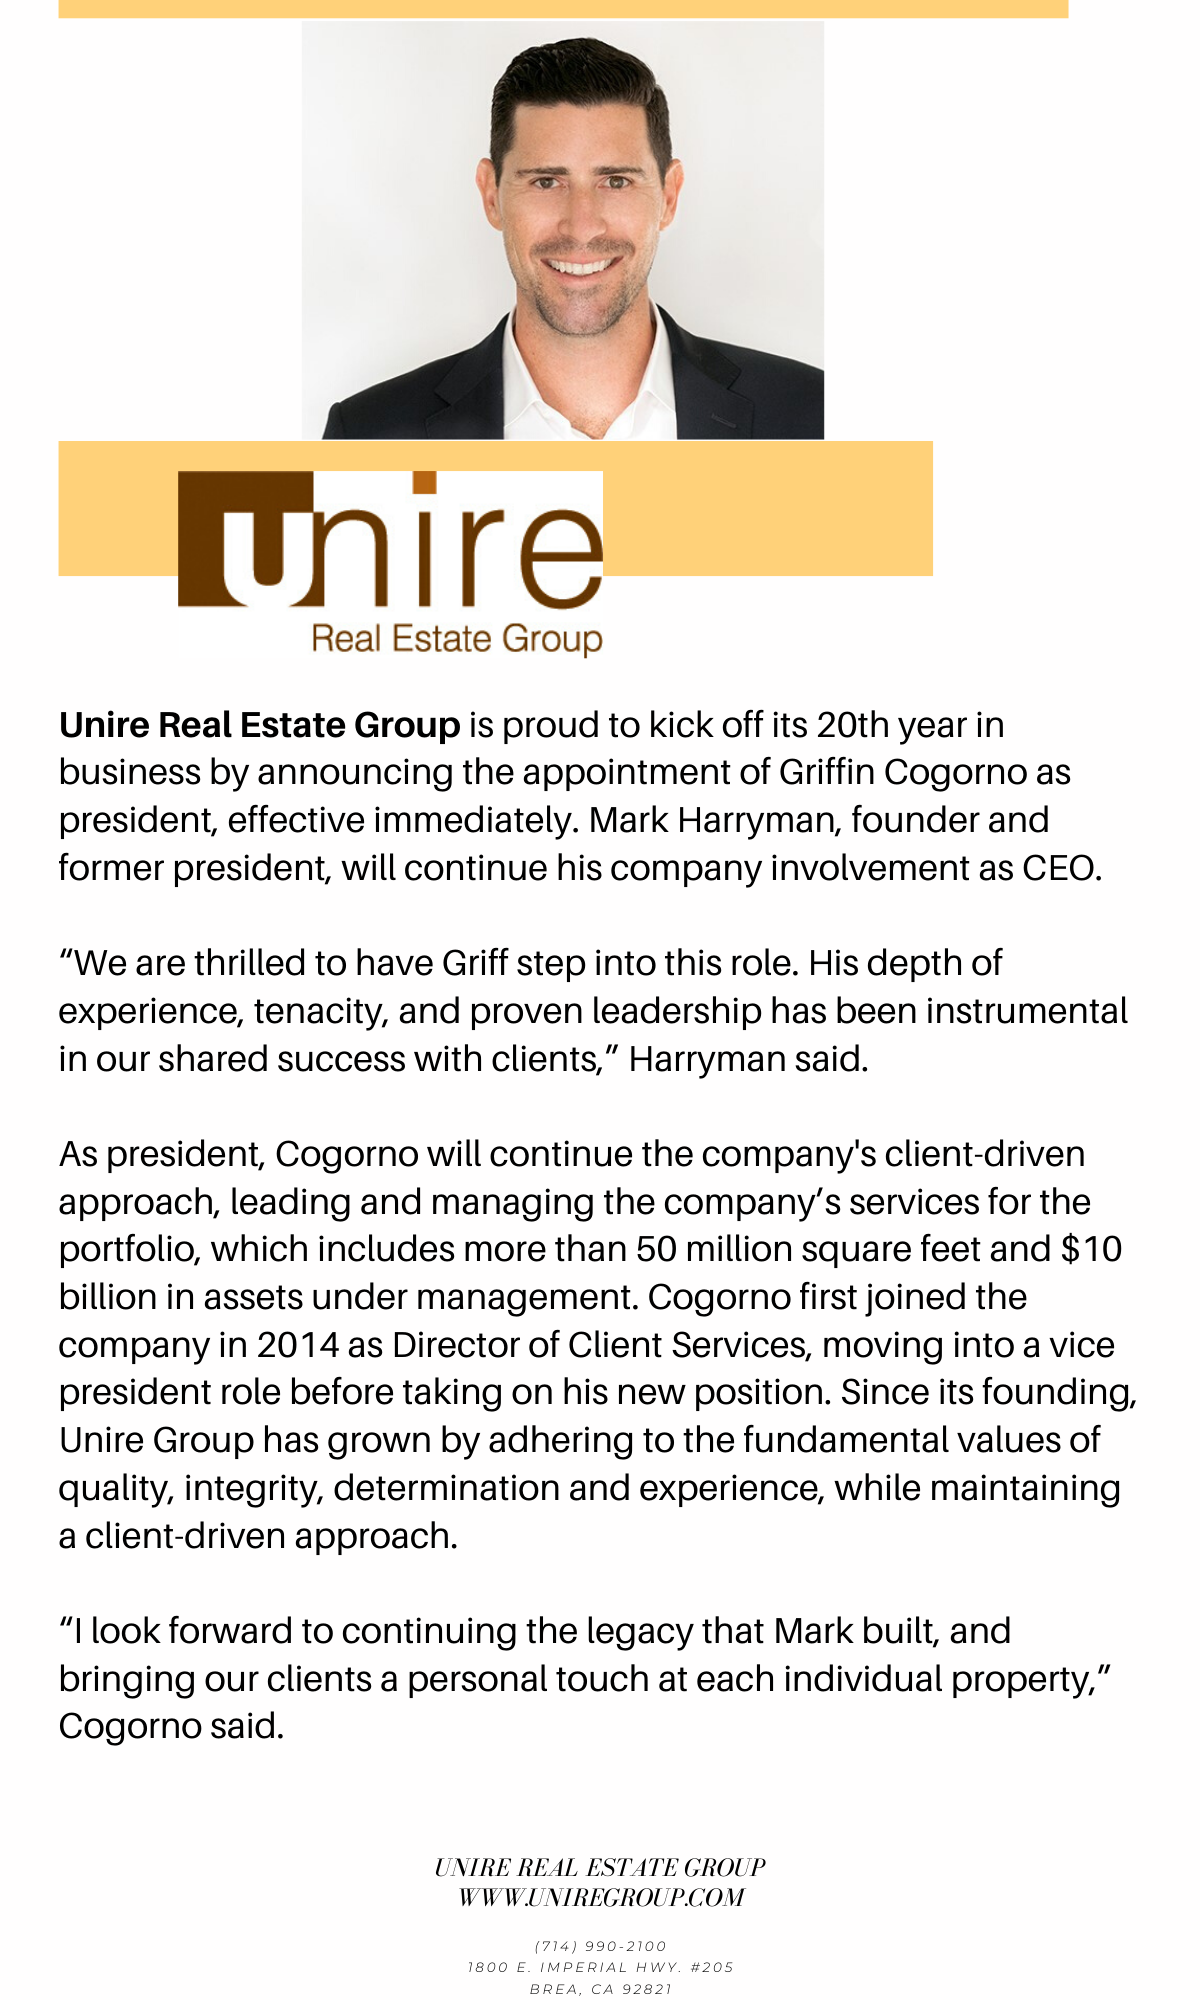 Unire Real Estate Group Celebrates 20 years, Appoints Cogorno as President